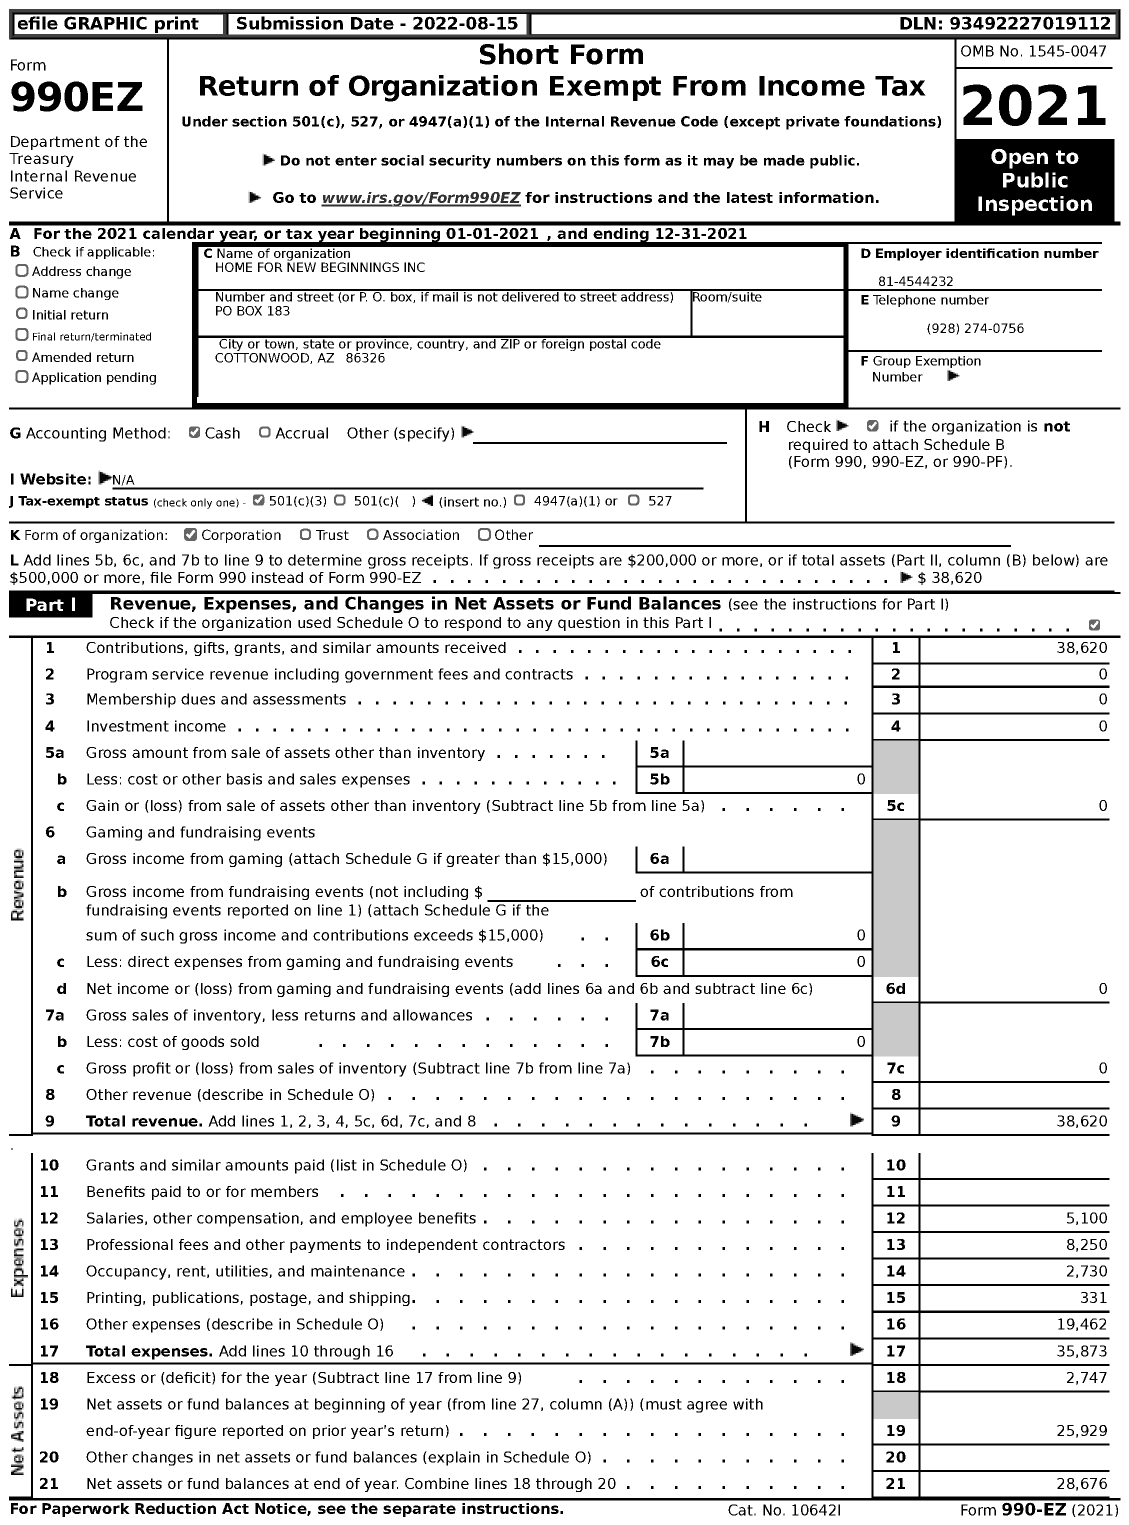 Image of first page of 2021 Form 990EZ for Home for New Beginnings